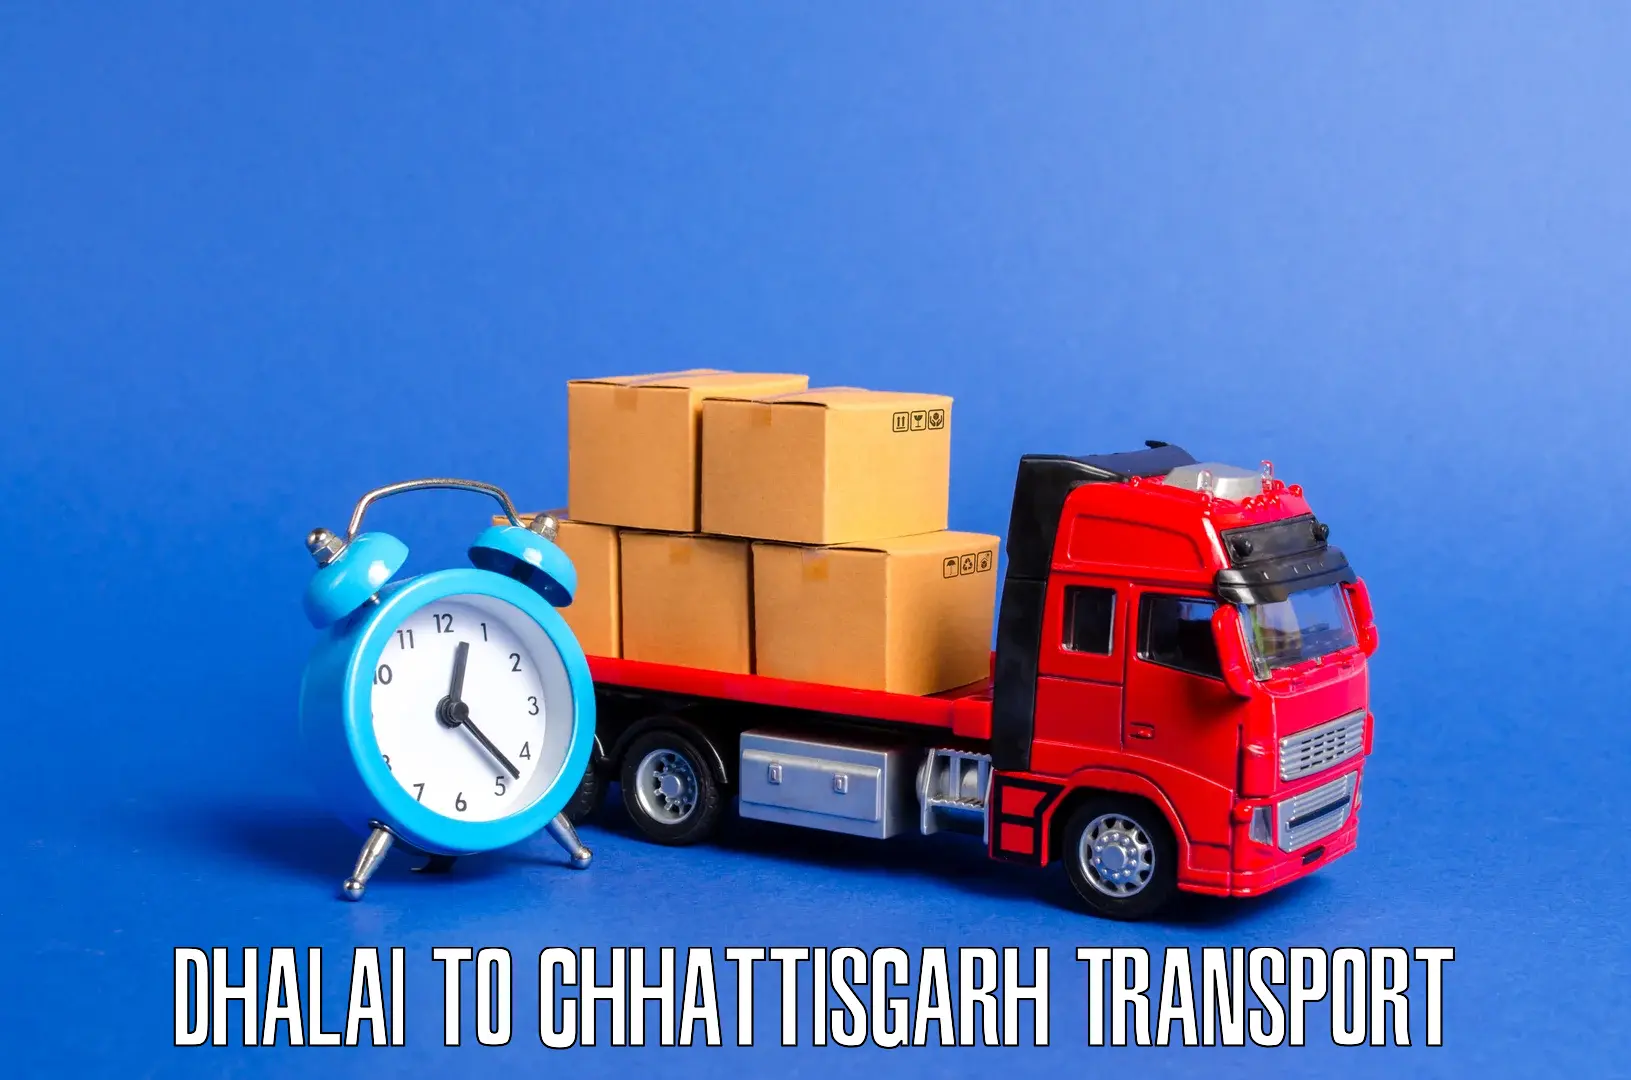 Delivery service Dhalai to Raipur